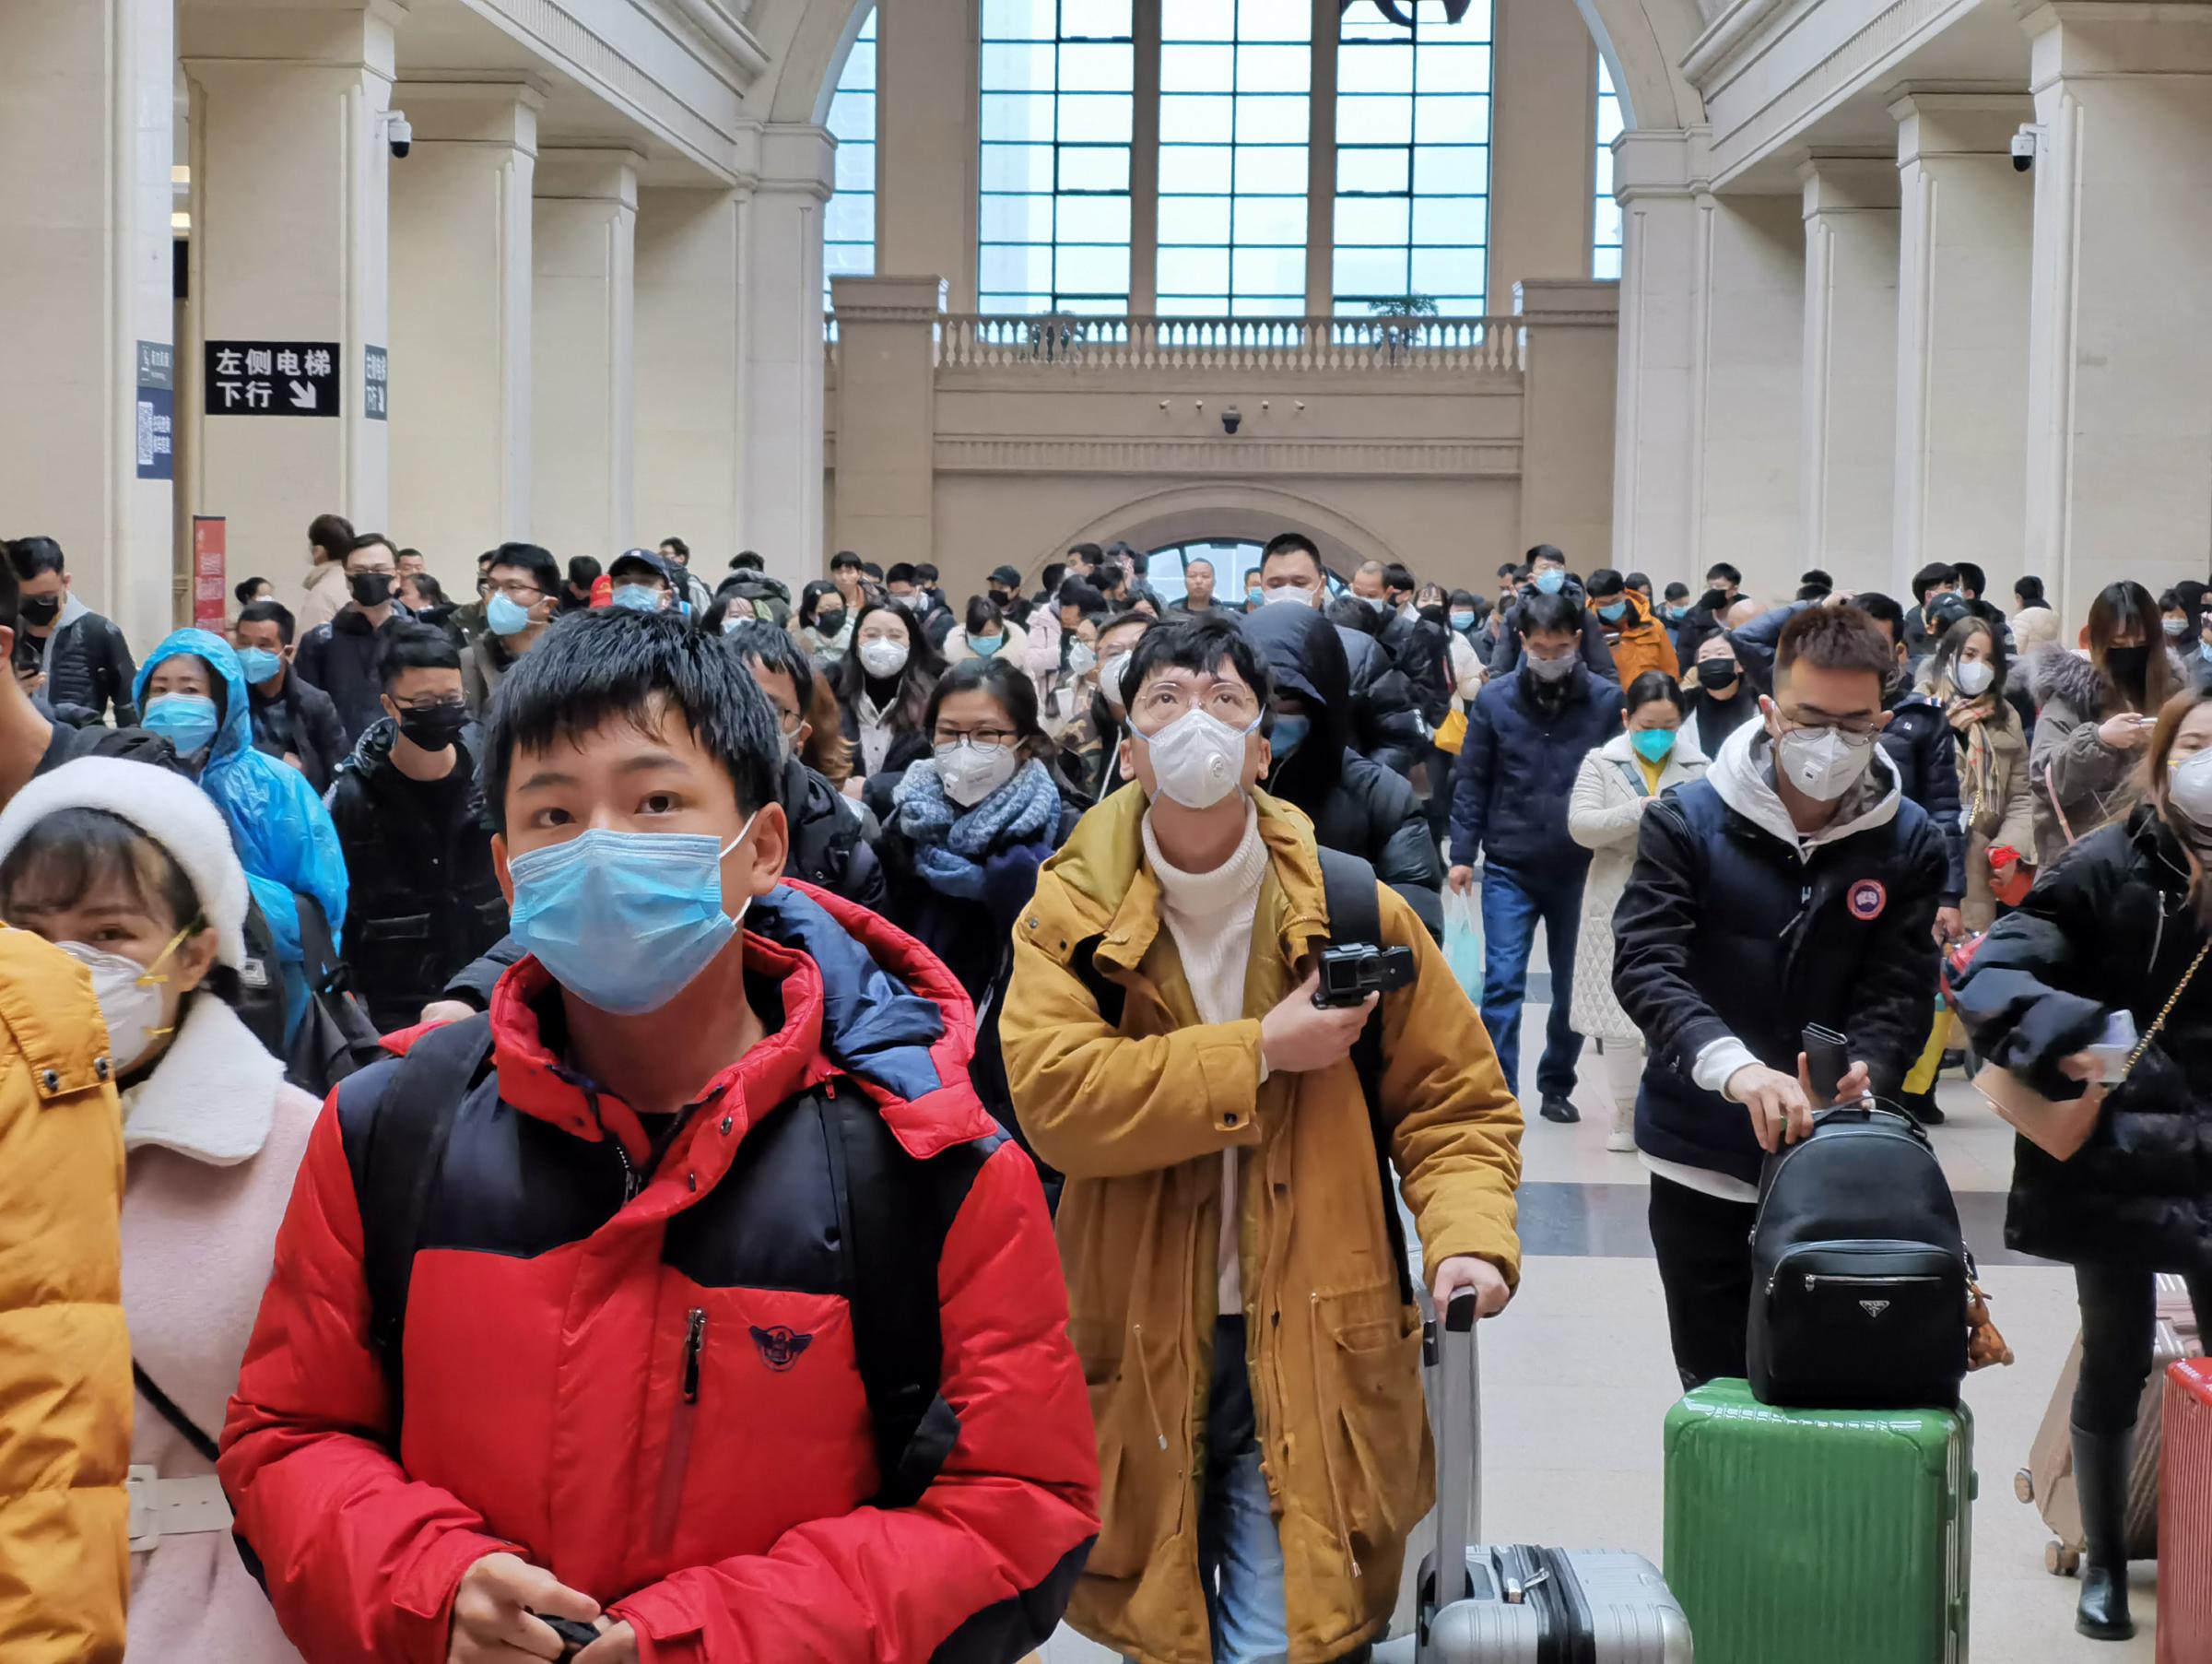 USA to evacuate its citizens from Wuhan, China amid coronavirus outbreak